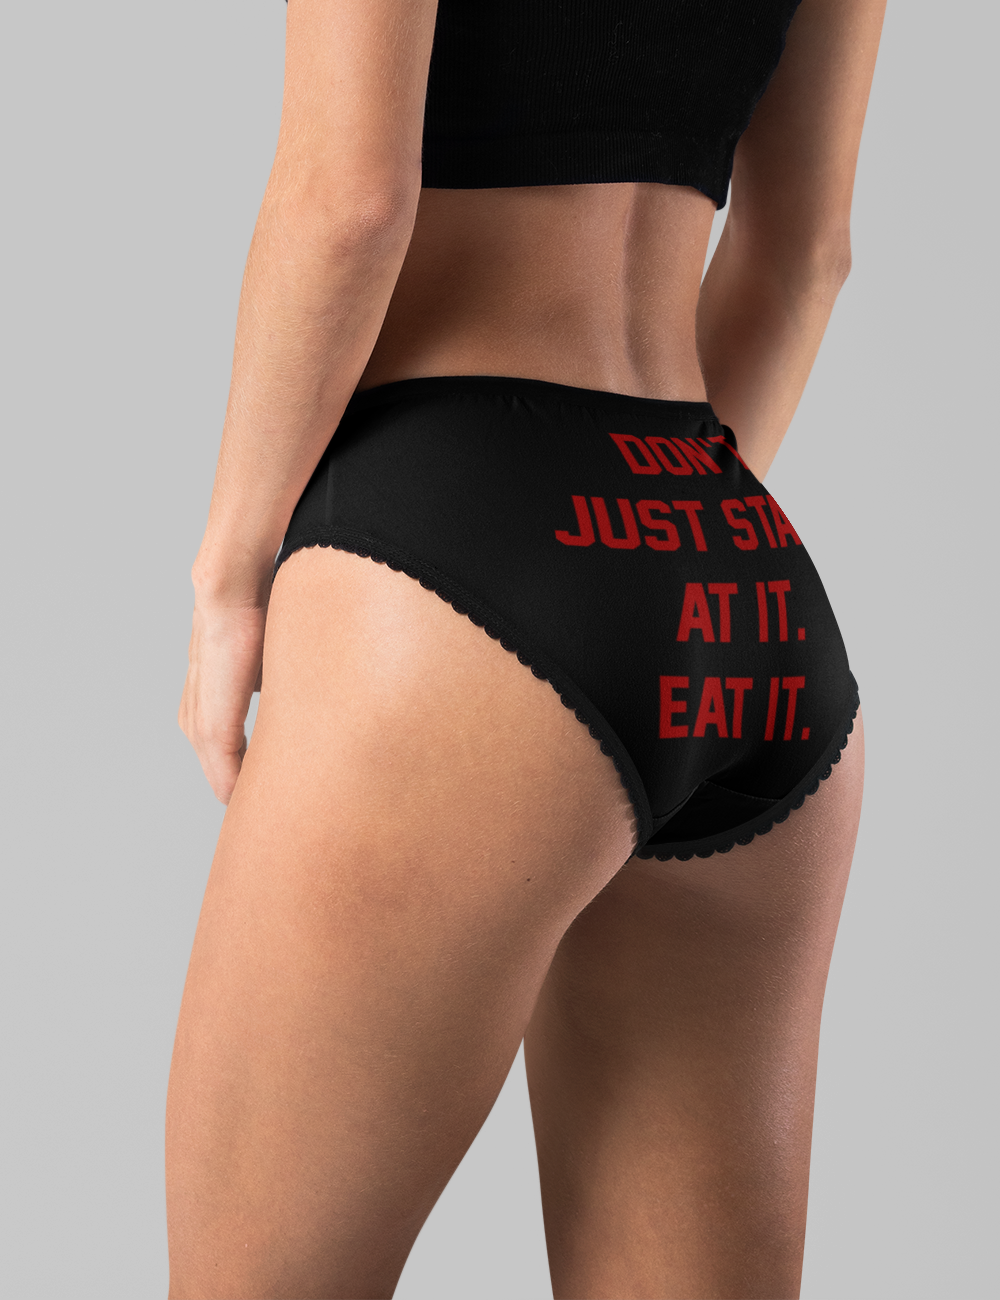 Don't Just Stare At It Eat It | Women's Intimate Briefs OniTakai